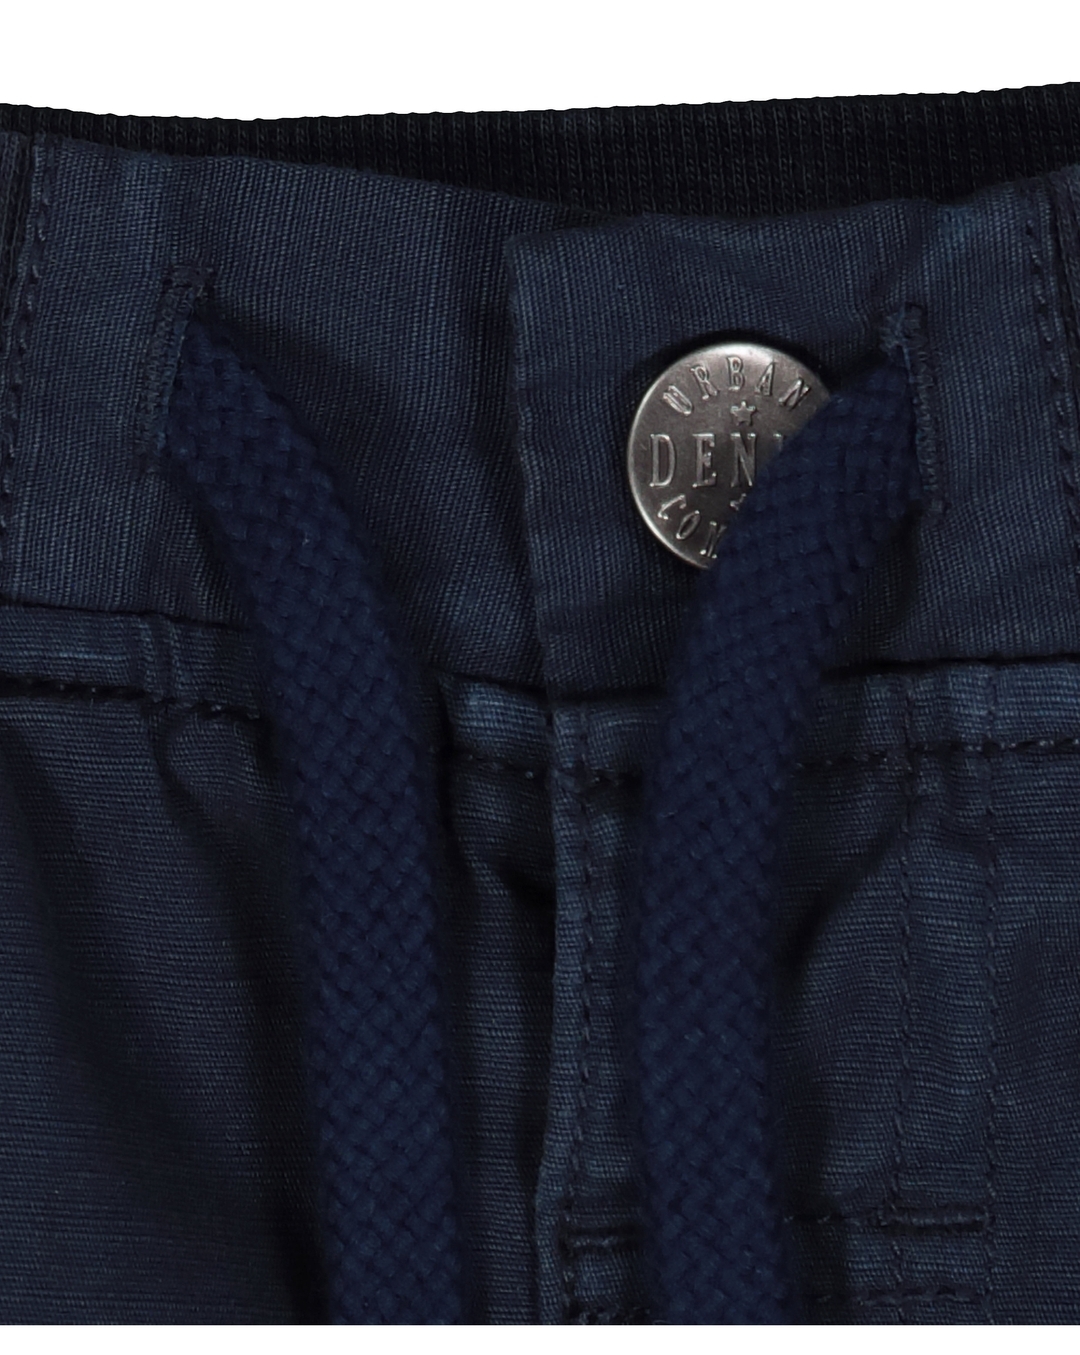 Stone Island  Navy Blue Cargo Pants For Children And Teen  annamegliocom  shop online